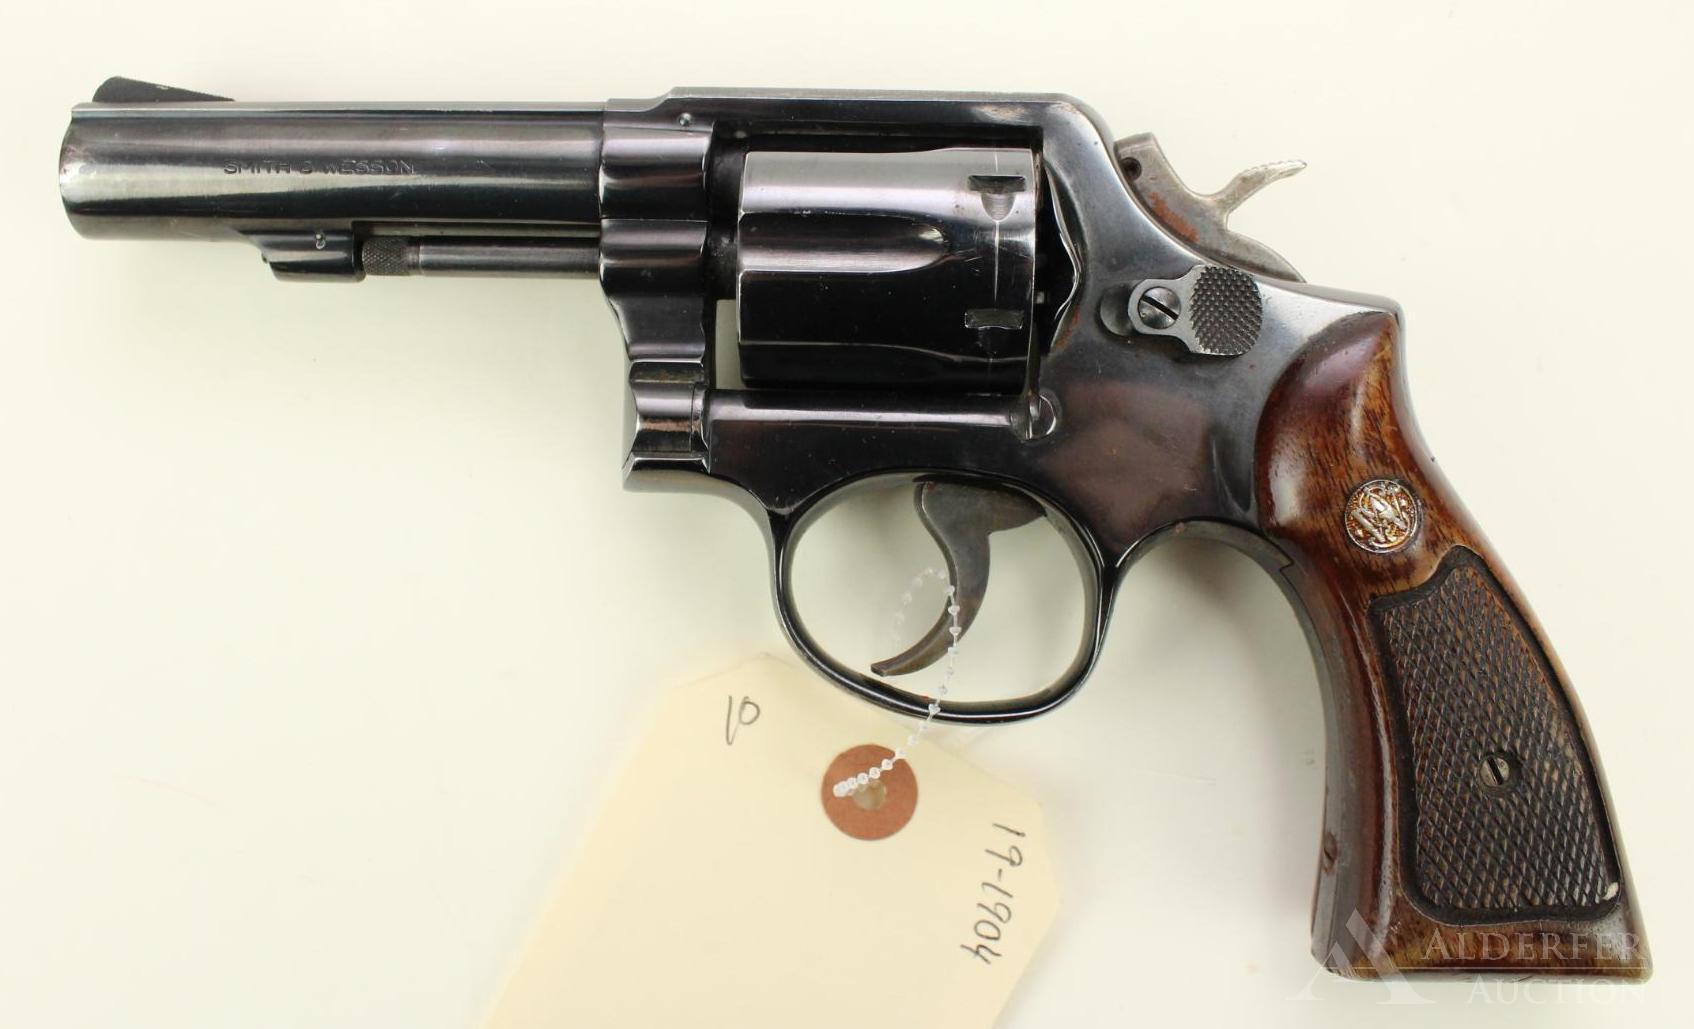 Smith & Wesson 10-6 double action revolver.